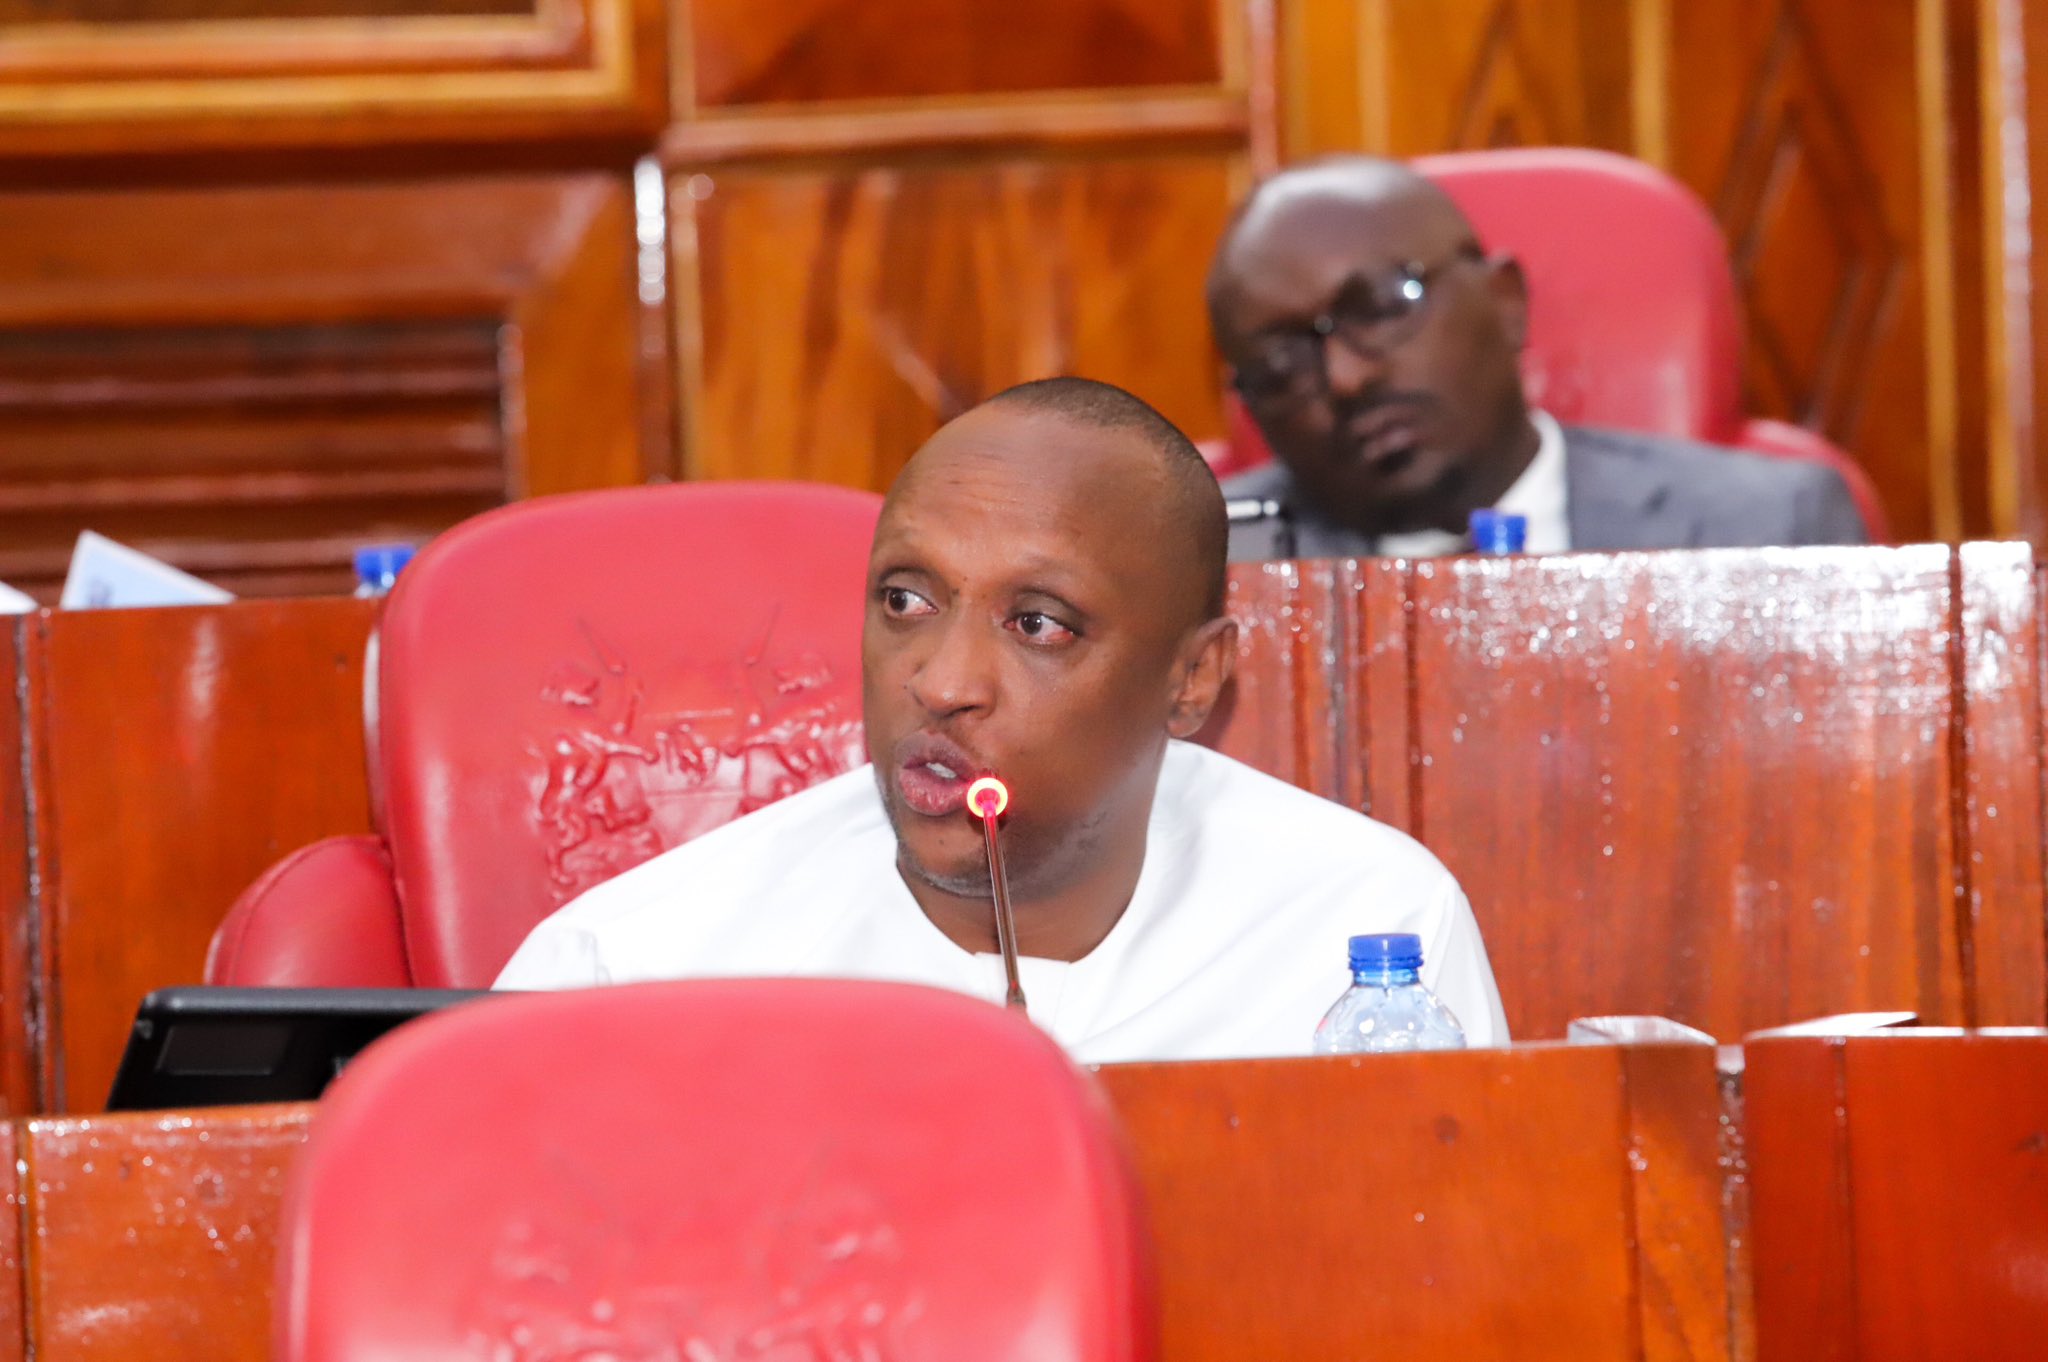 Senate Committee orders special audit of funds in Isiolo County